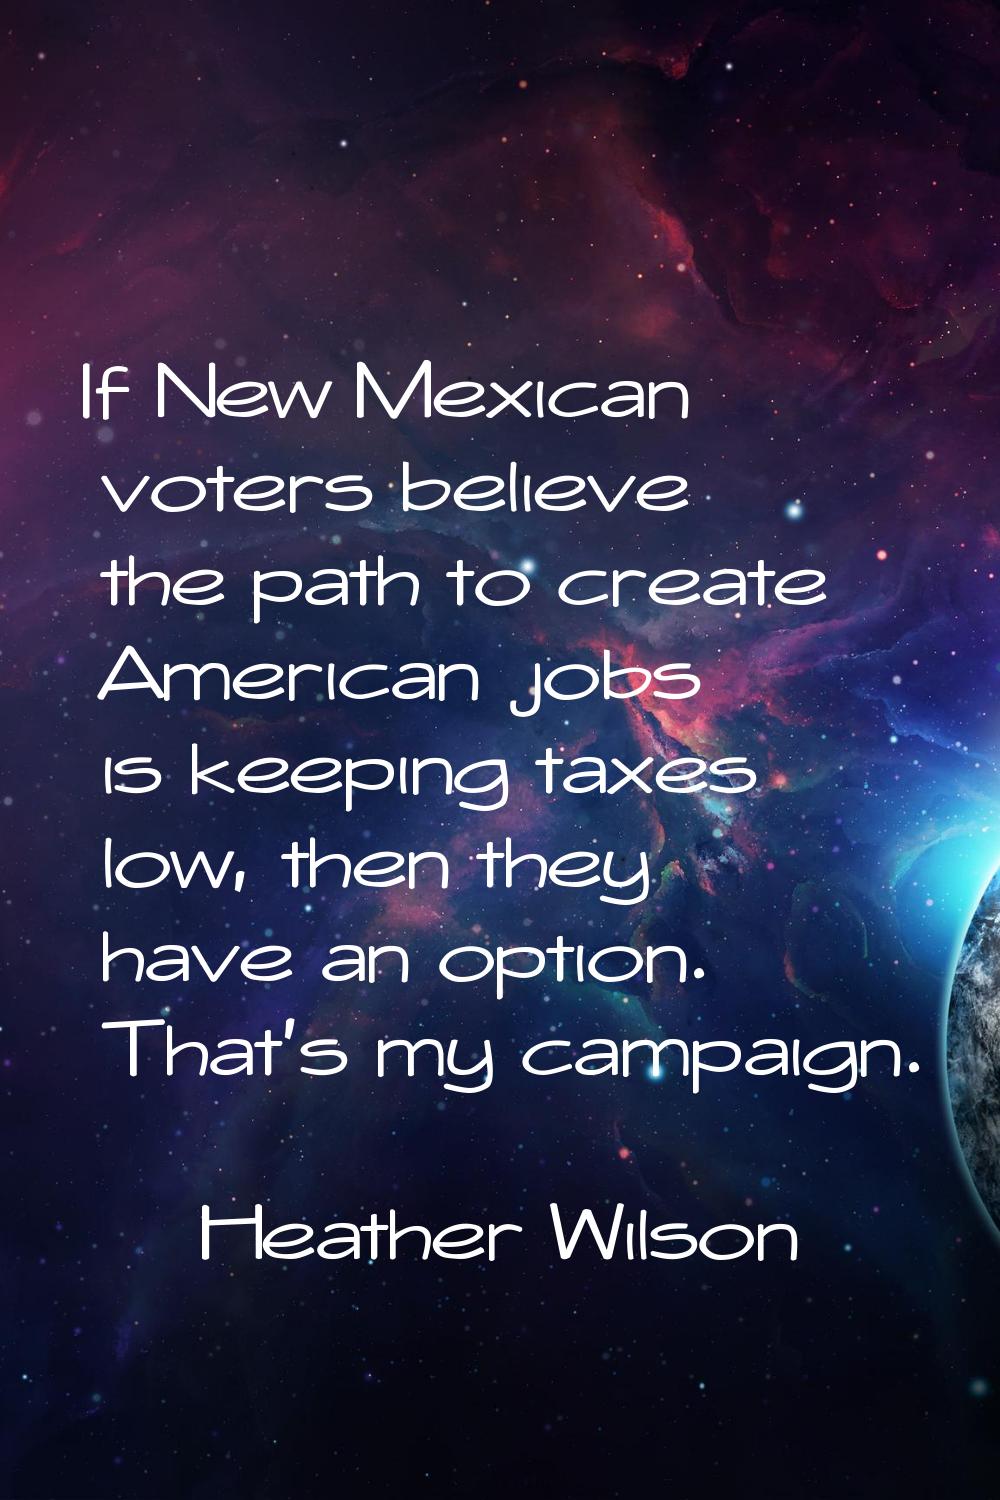 If New Mexican voters believe the path to create American jobs is keeping taxes low, then they have